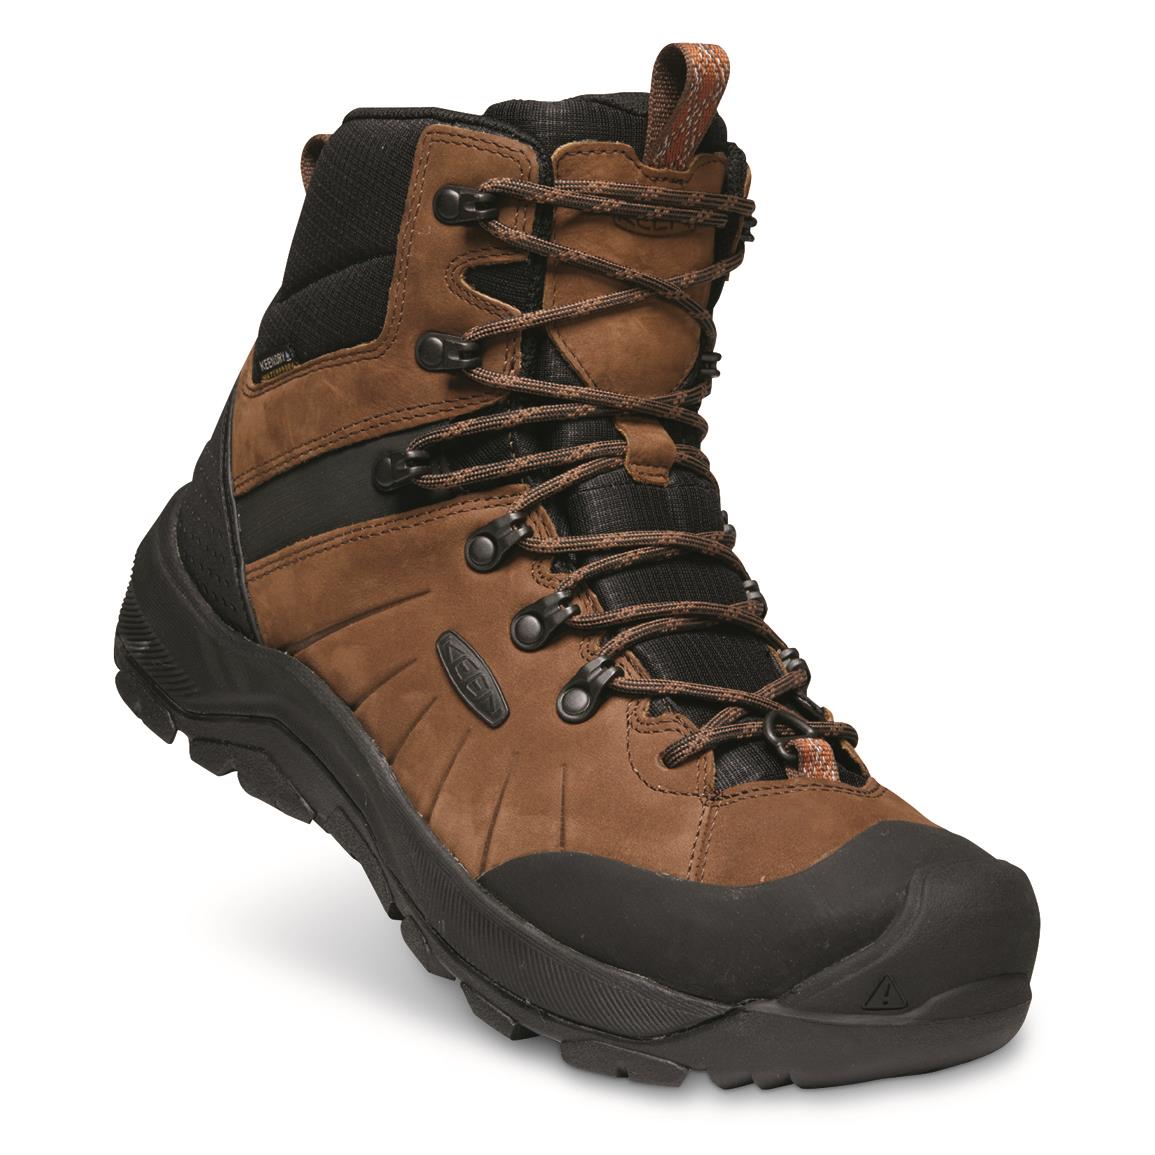 KEEN Men's Revel IV Polar Mid Waterproof Insulated Hiking Boots - 716019, Hiking Boots & Shoes 